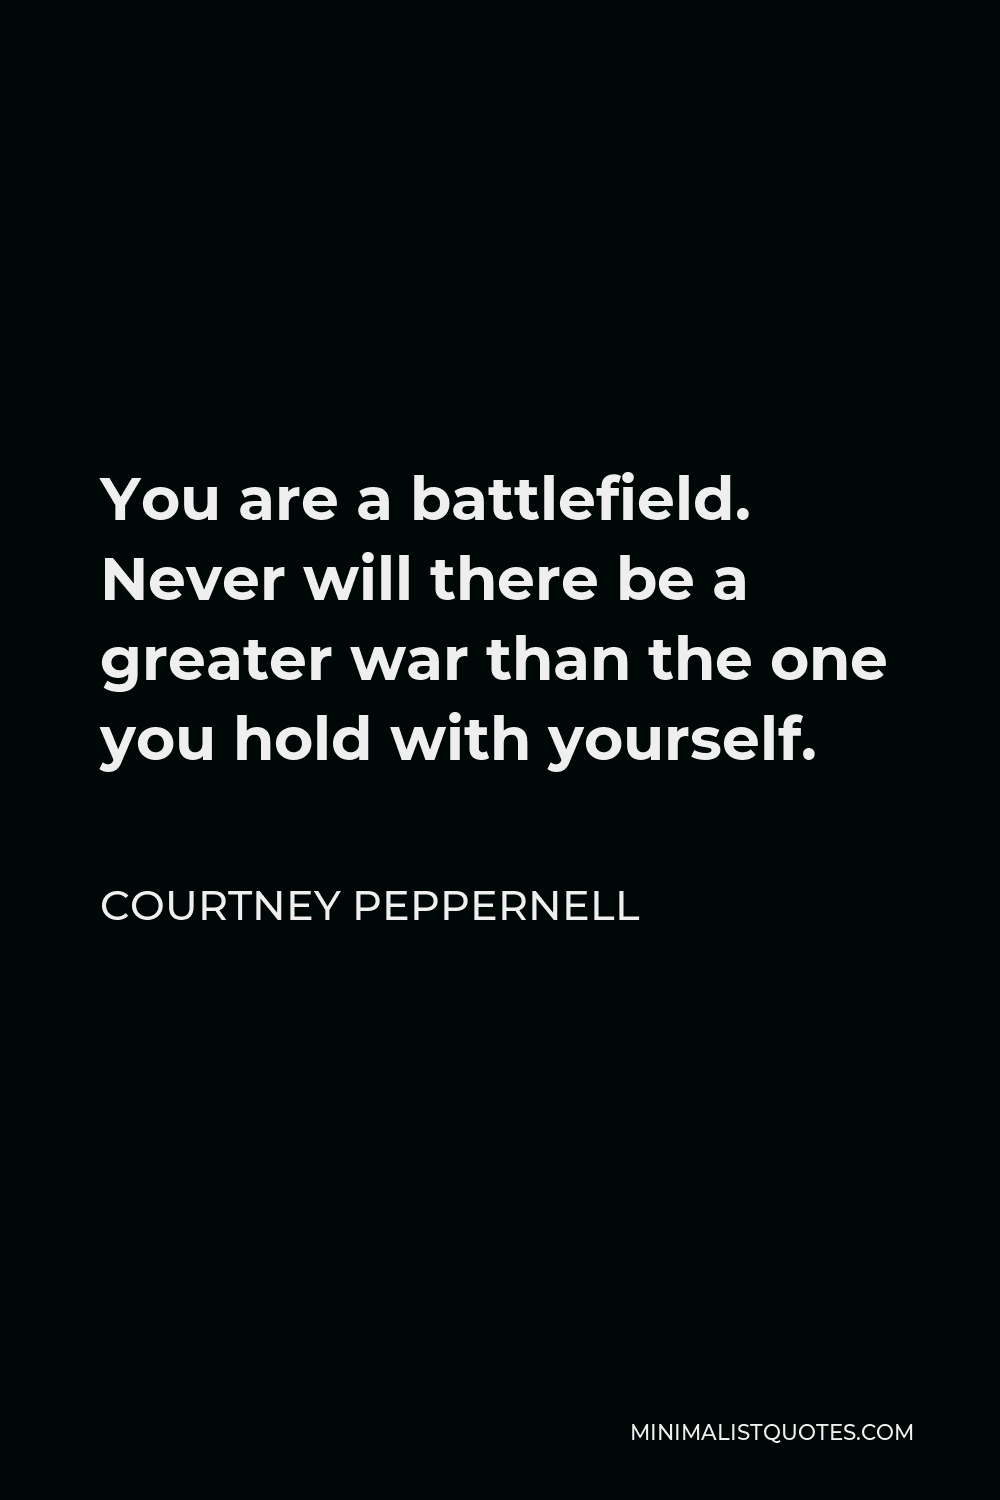 Courtney Peppernell Quote - You are a battlefield. Never will there be a greater war than the one you hold with yourself.